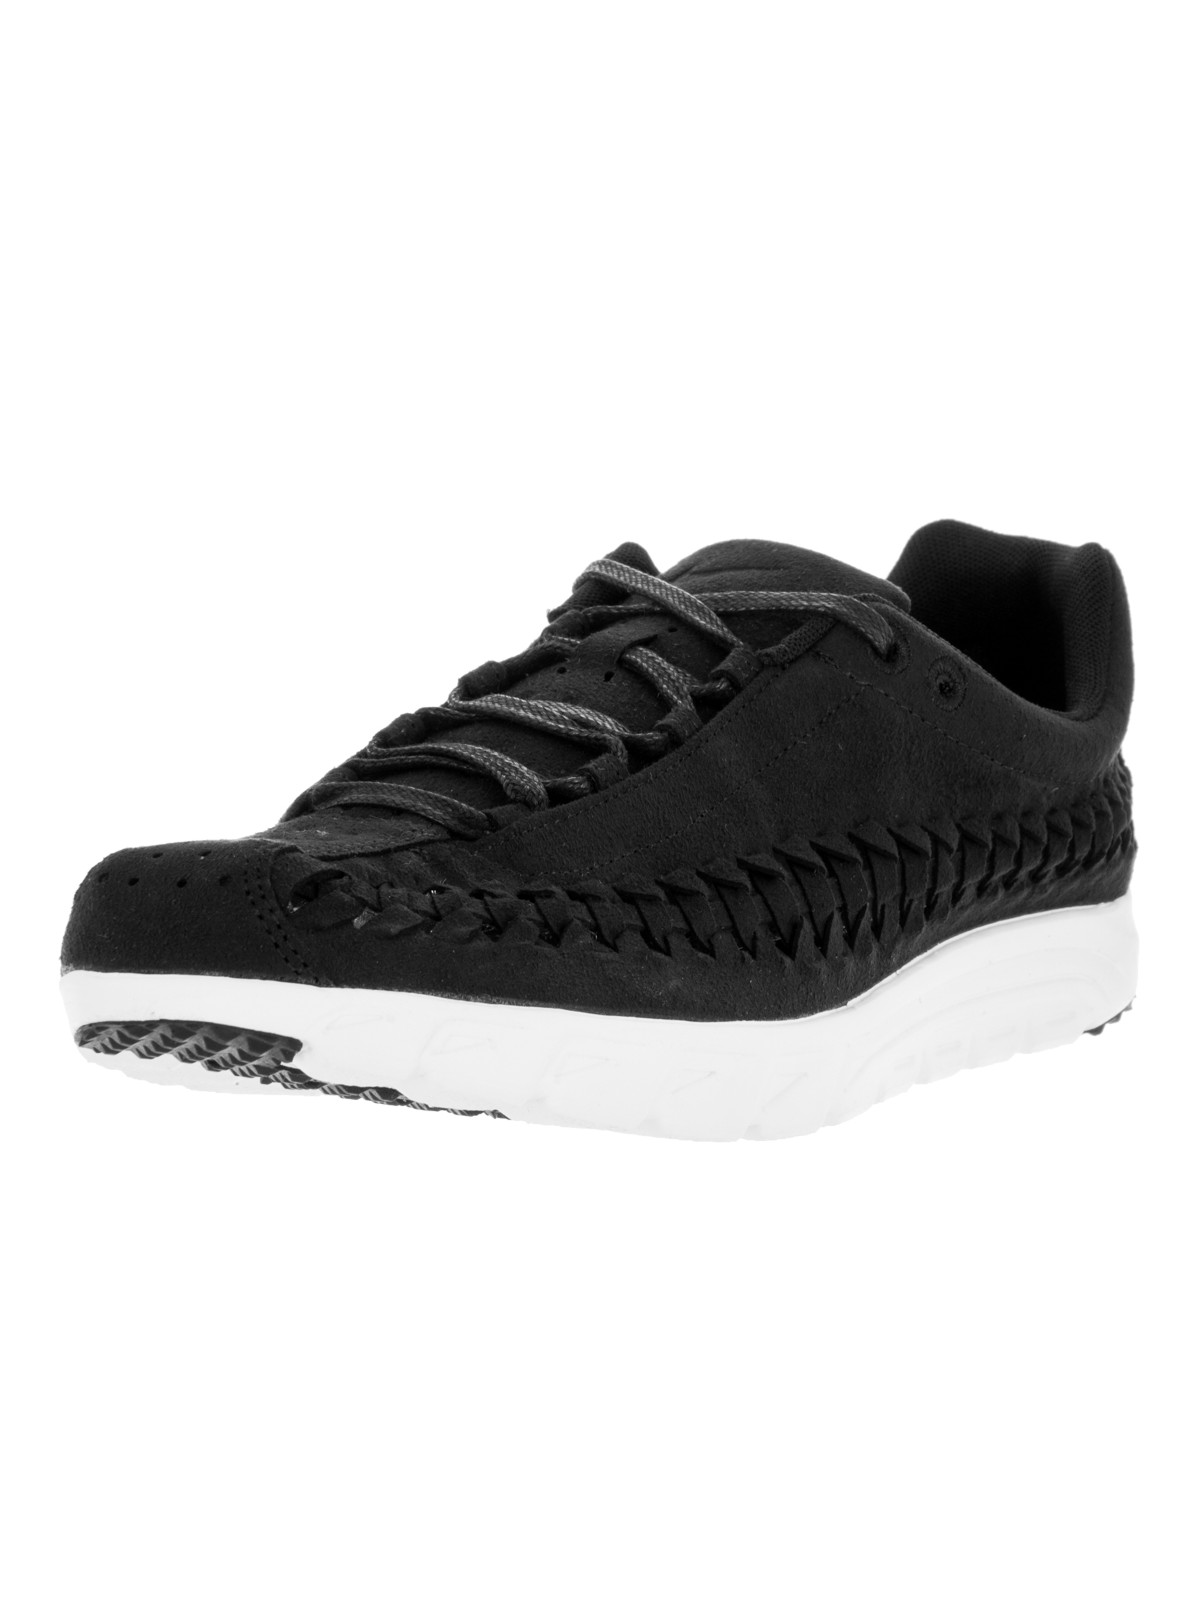 Men's Mayfly Woven Casual Shoe - image 1 of 5